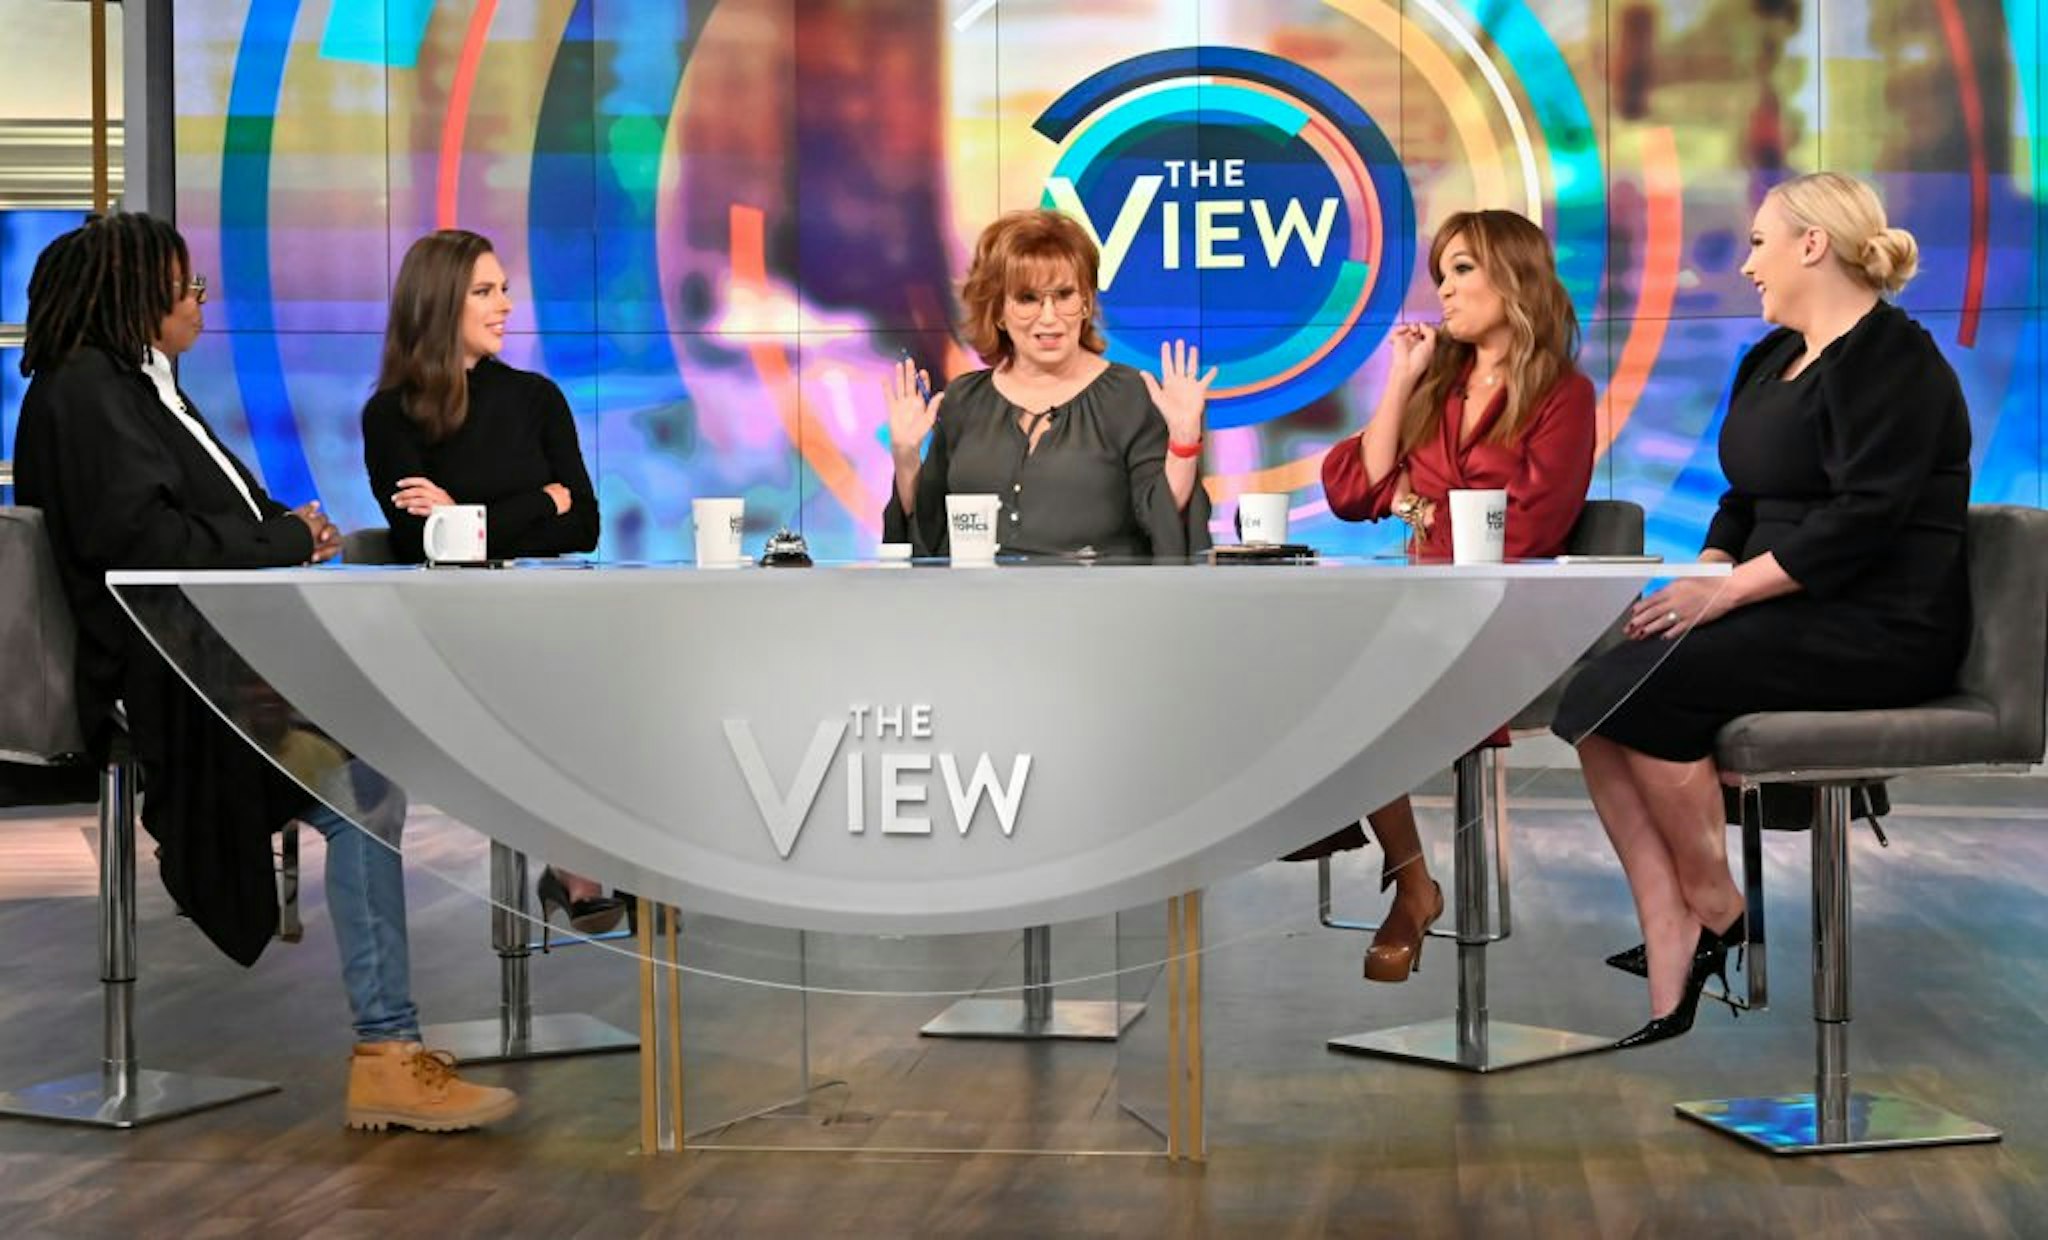 THE VIEW - Stephen King is the guest today, Wednesday, September 11, 2019. "The View" airs Monday-Friday 11am-12pm, ET on ABC. (Jeff Neira/Walt Disney Television via Getty Images) WHOOPI GOLDBERG, ABBY HUNTSMAN, JOY BEHAR, SUNNY HOSTIN, MEGHAN MCCAIN